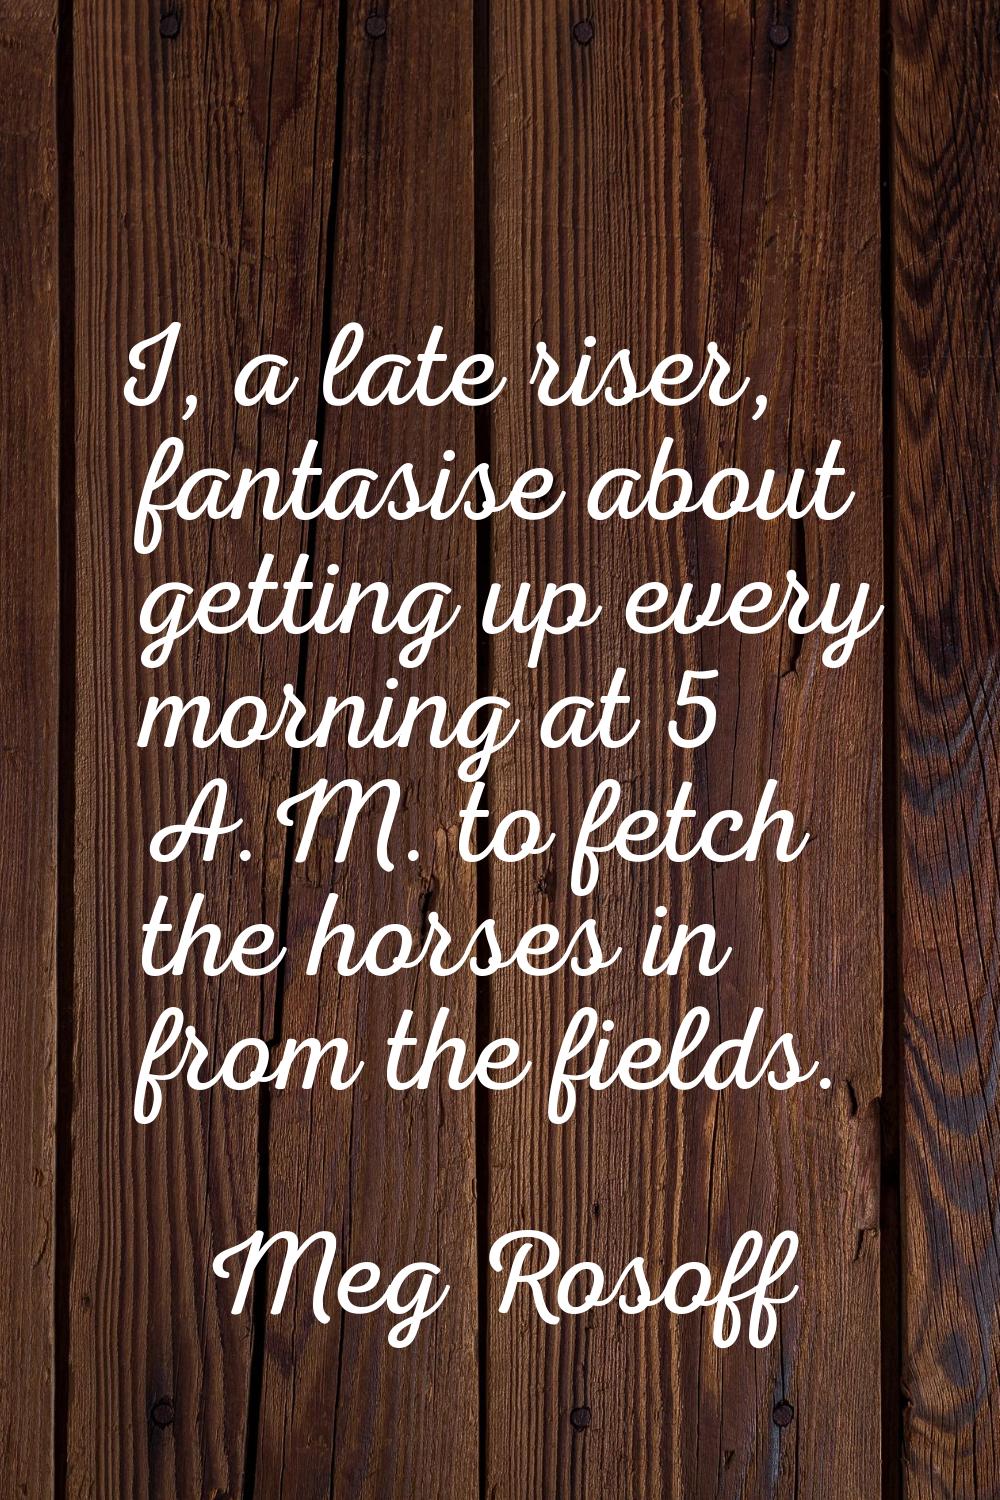 I, a late riser, fantasise about getting up every morning at 5 A.M. to fetch the horses in from the